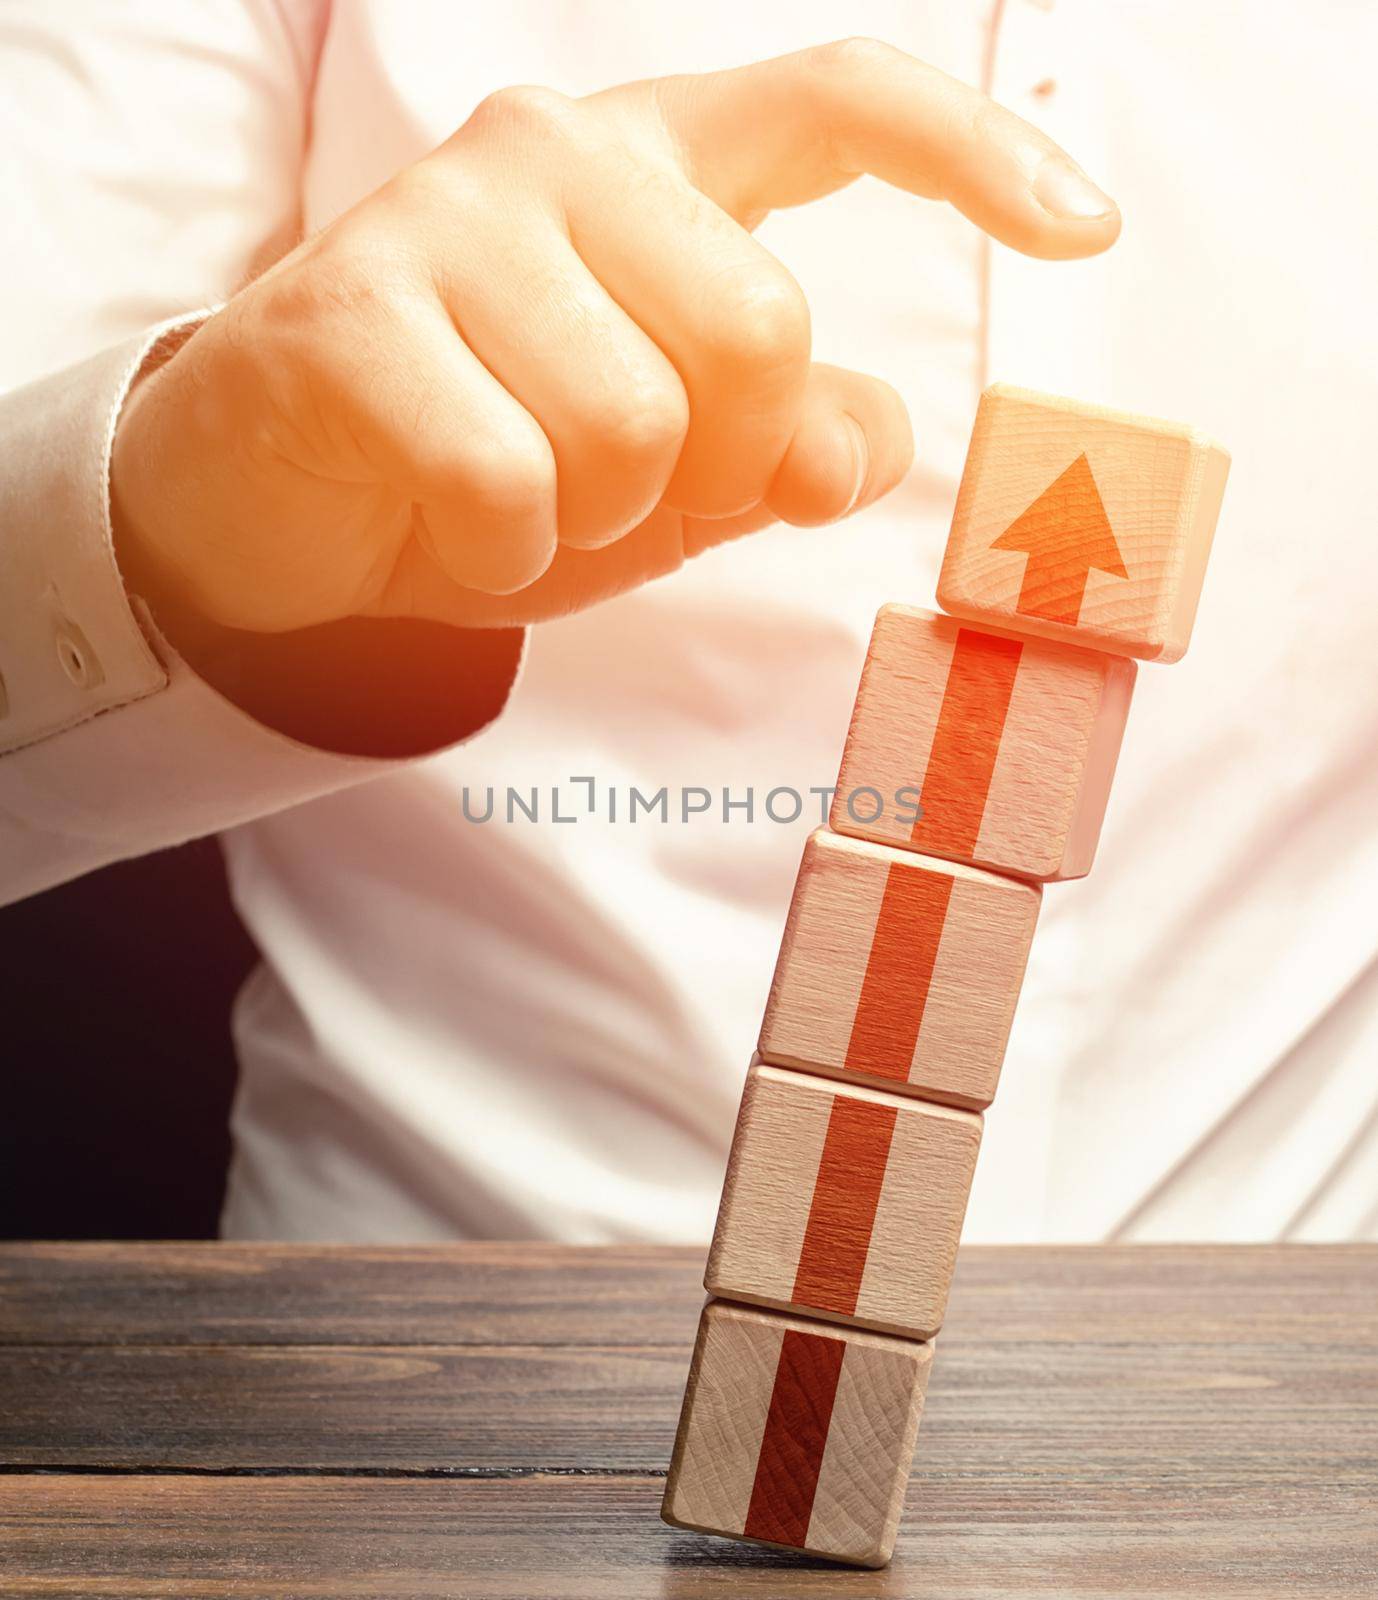 A man knocks down a tower of blocks with an up arrow. End of career, destruction of progress and achievements. Sabotage. Eliminate the phenomenon, prevent further growth. Disruption business processes by iLixe48